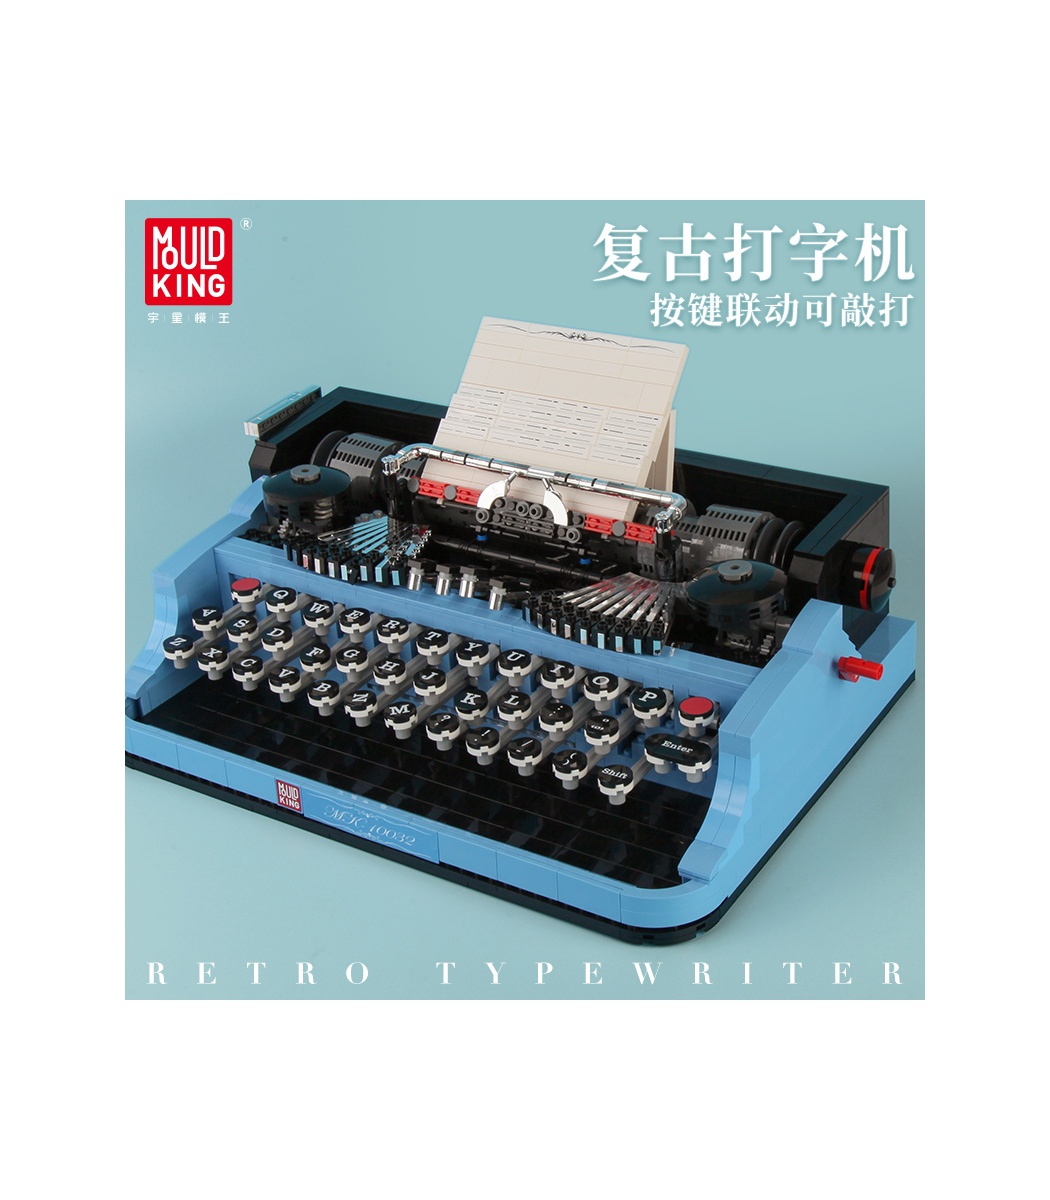 MOULD KING 10032 MOC Toys The Classic Retro Typewriter Model